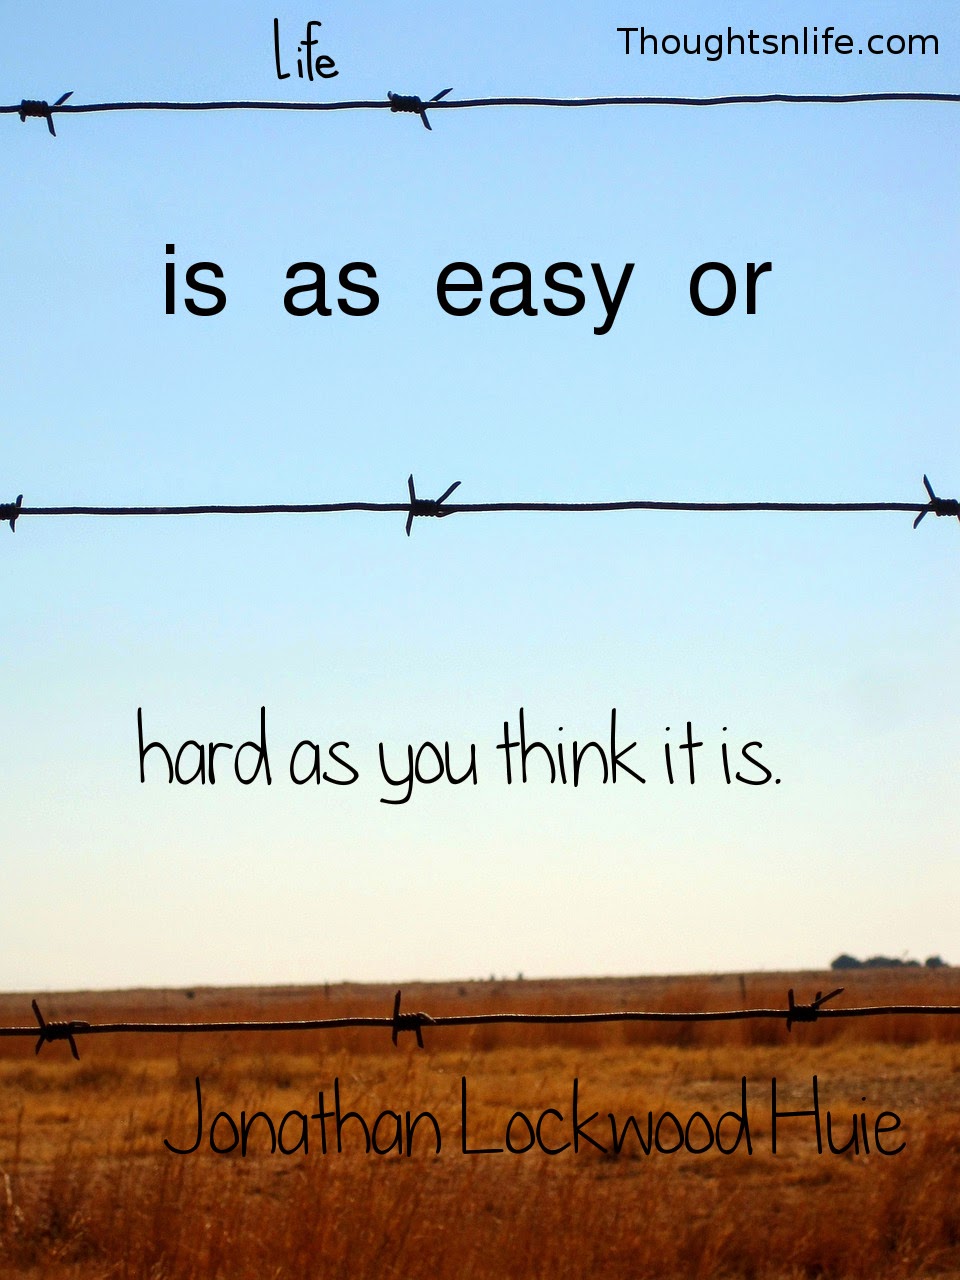 Thoughtsnlife.com: Life is as easy or as hard as you think it is.